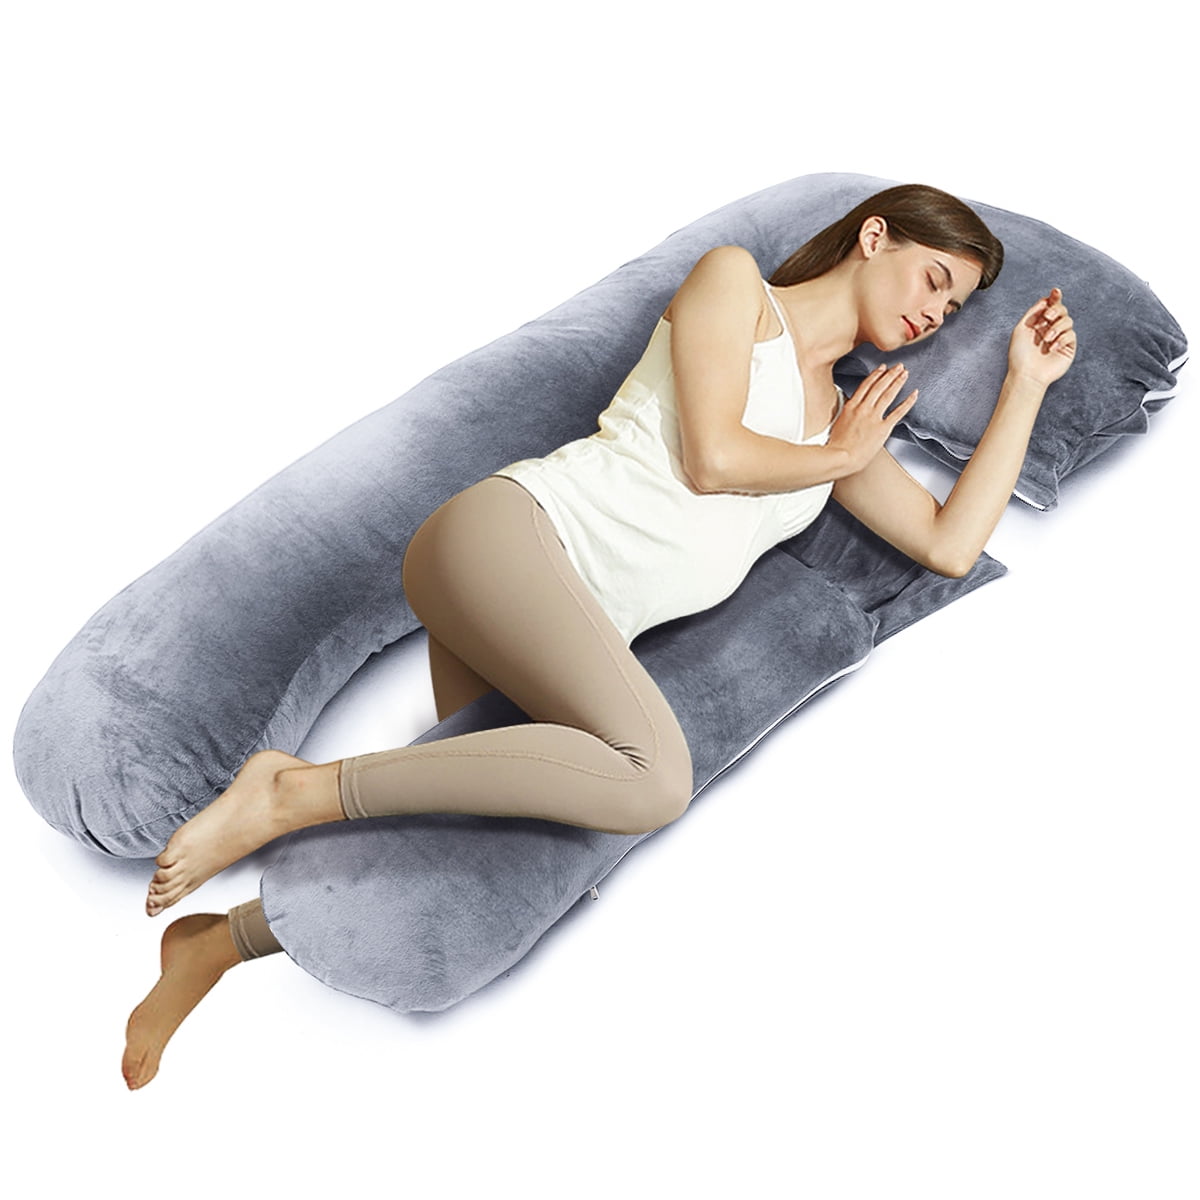 Black, 55 inches Pregnancy Pillow U Shaped Full Body Pillows for Maternity Support Sleeping Pillow with Washable Velvet Cover 